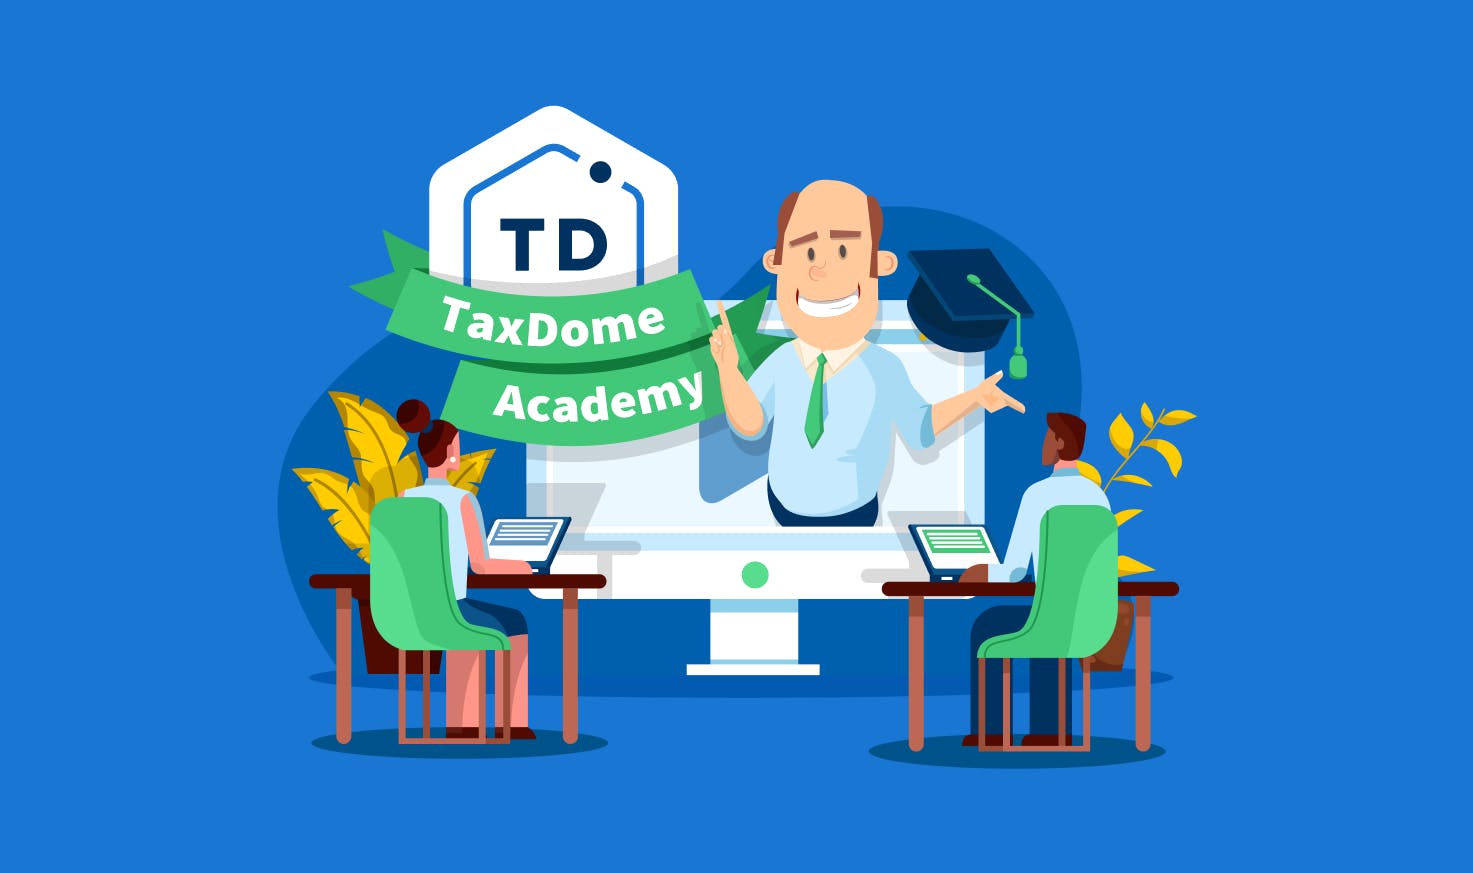 Introducing TaxDome Academy 